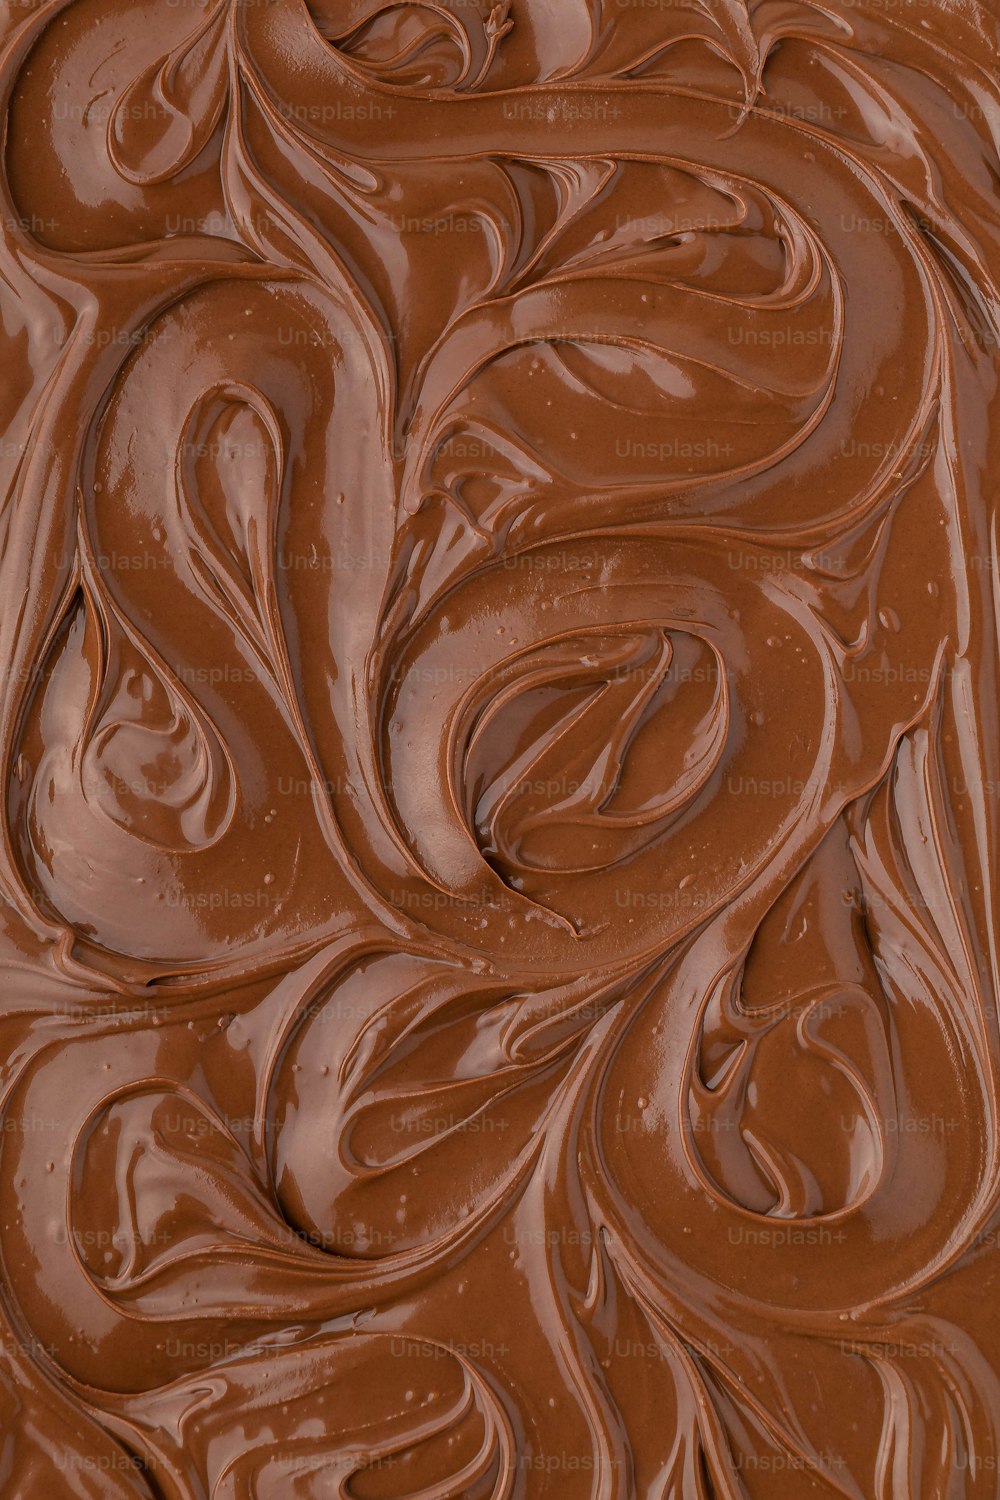 a close up of a chocolate cake with chocolate icing